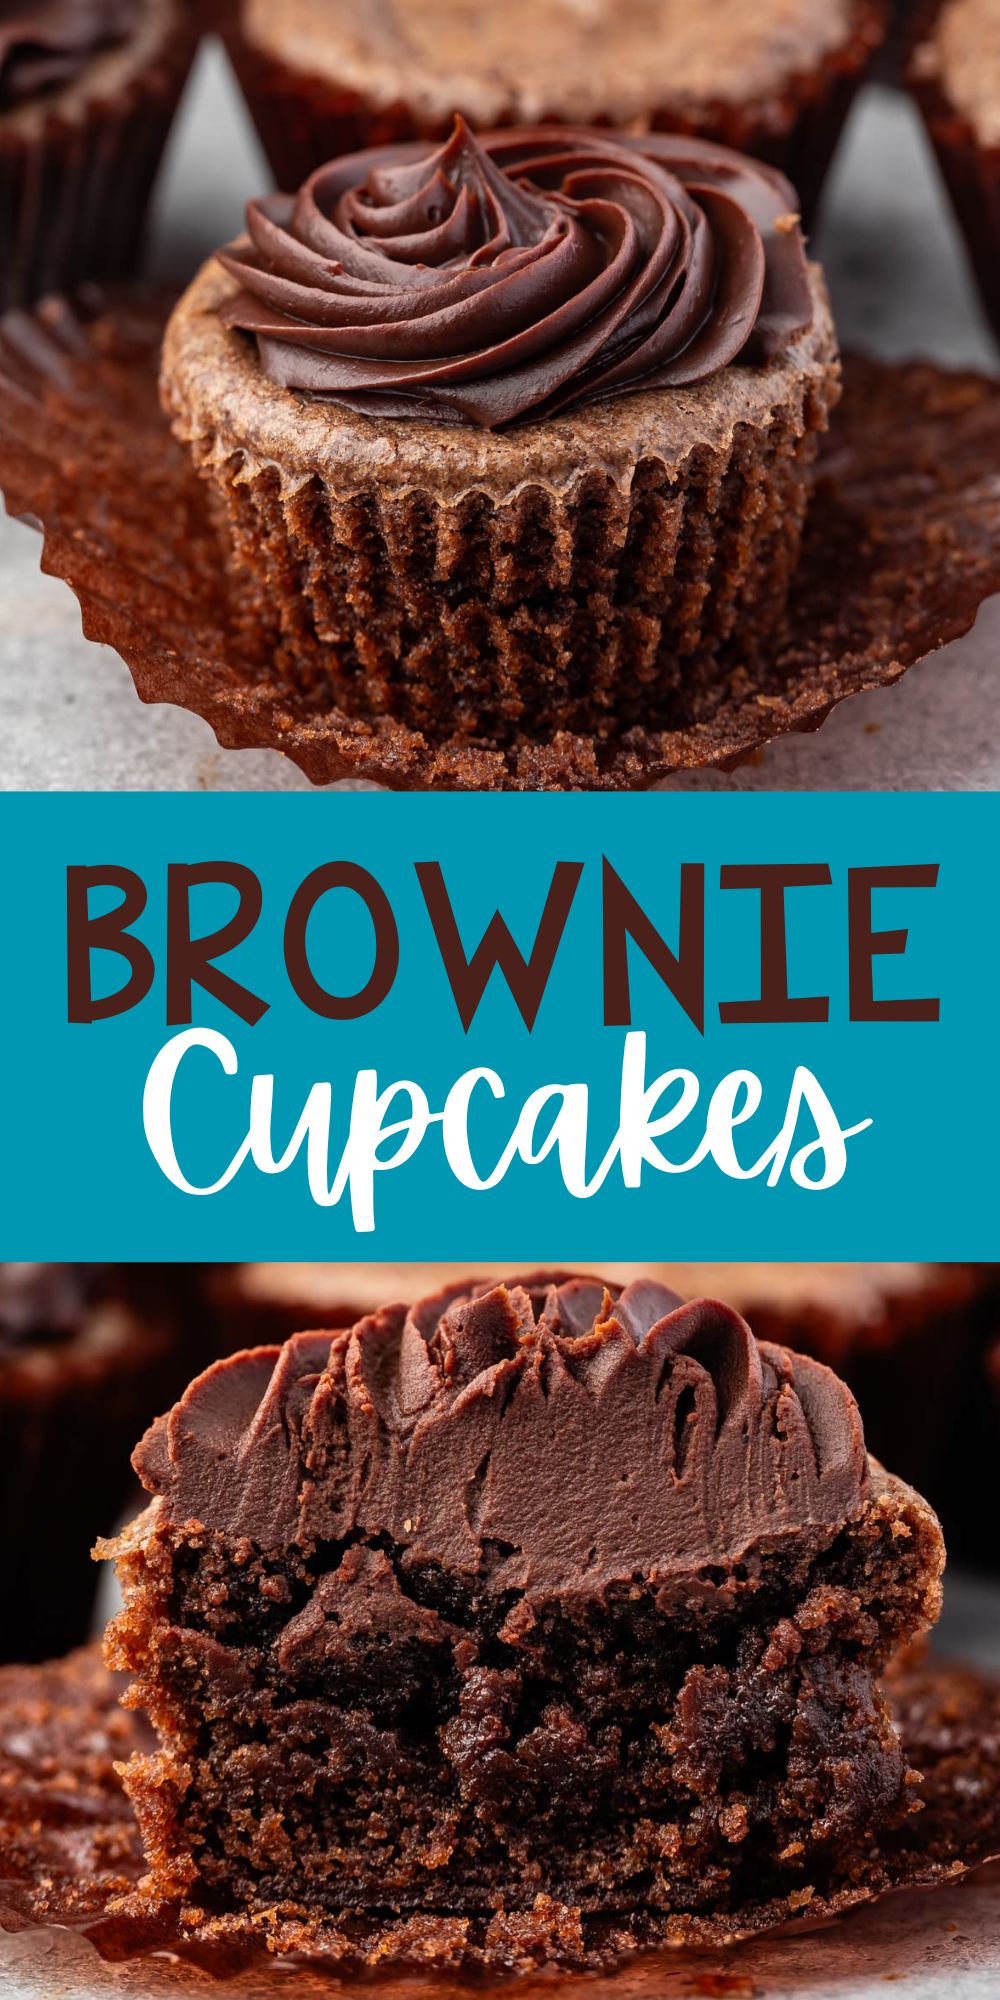 two photos of cupcake made of brownies with chocolate frosting on top with words on the image.